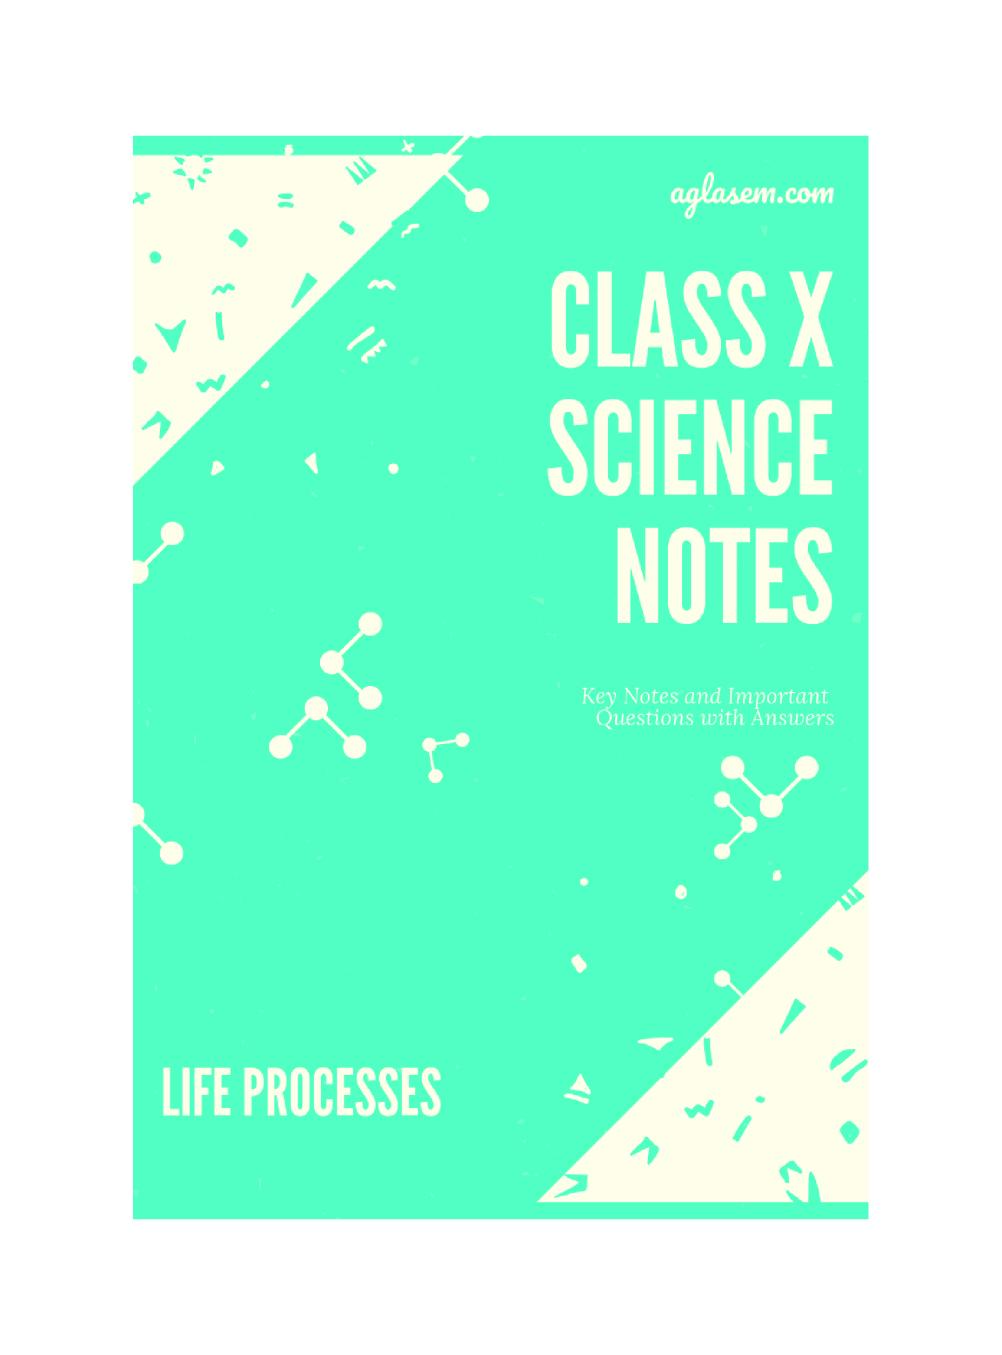 Class 10 Science Notes for Life Processes - Page 1